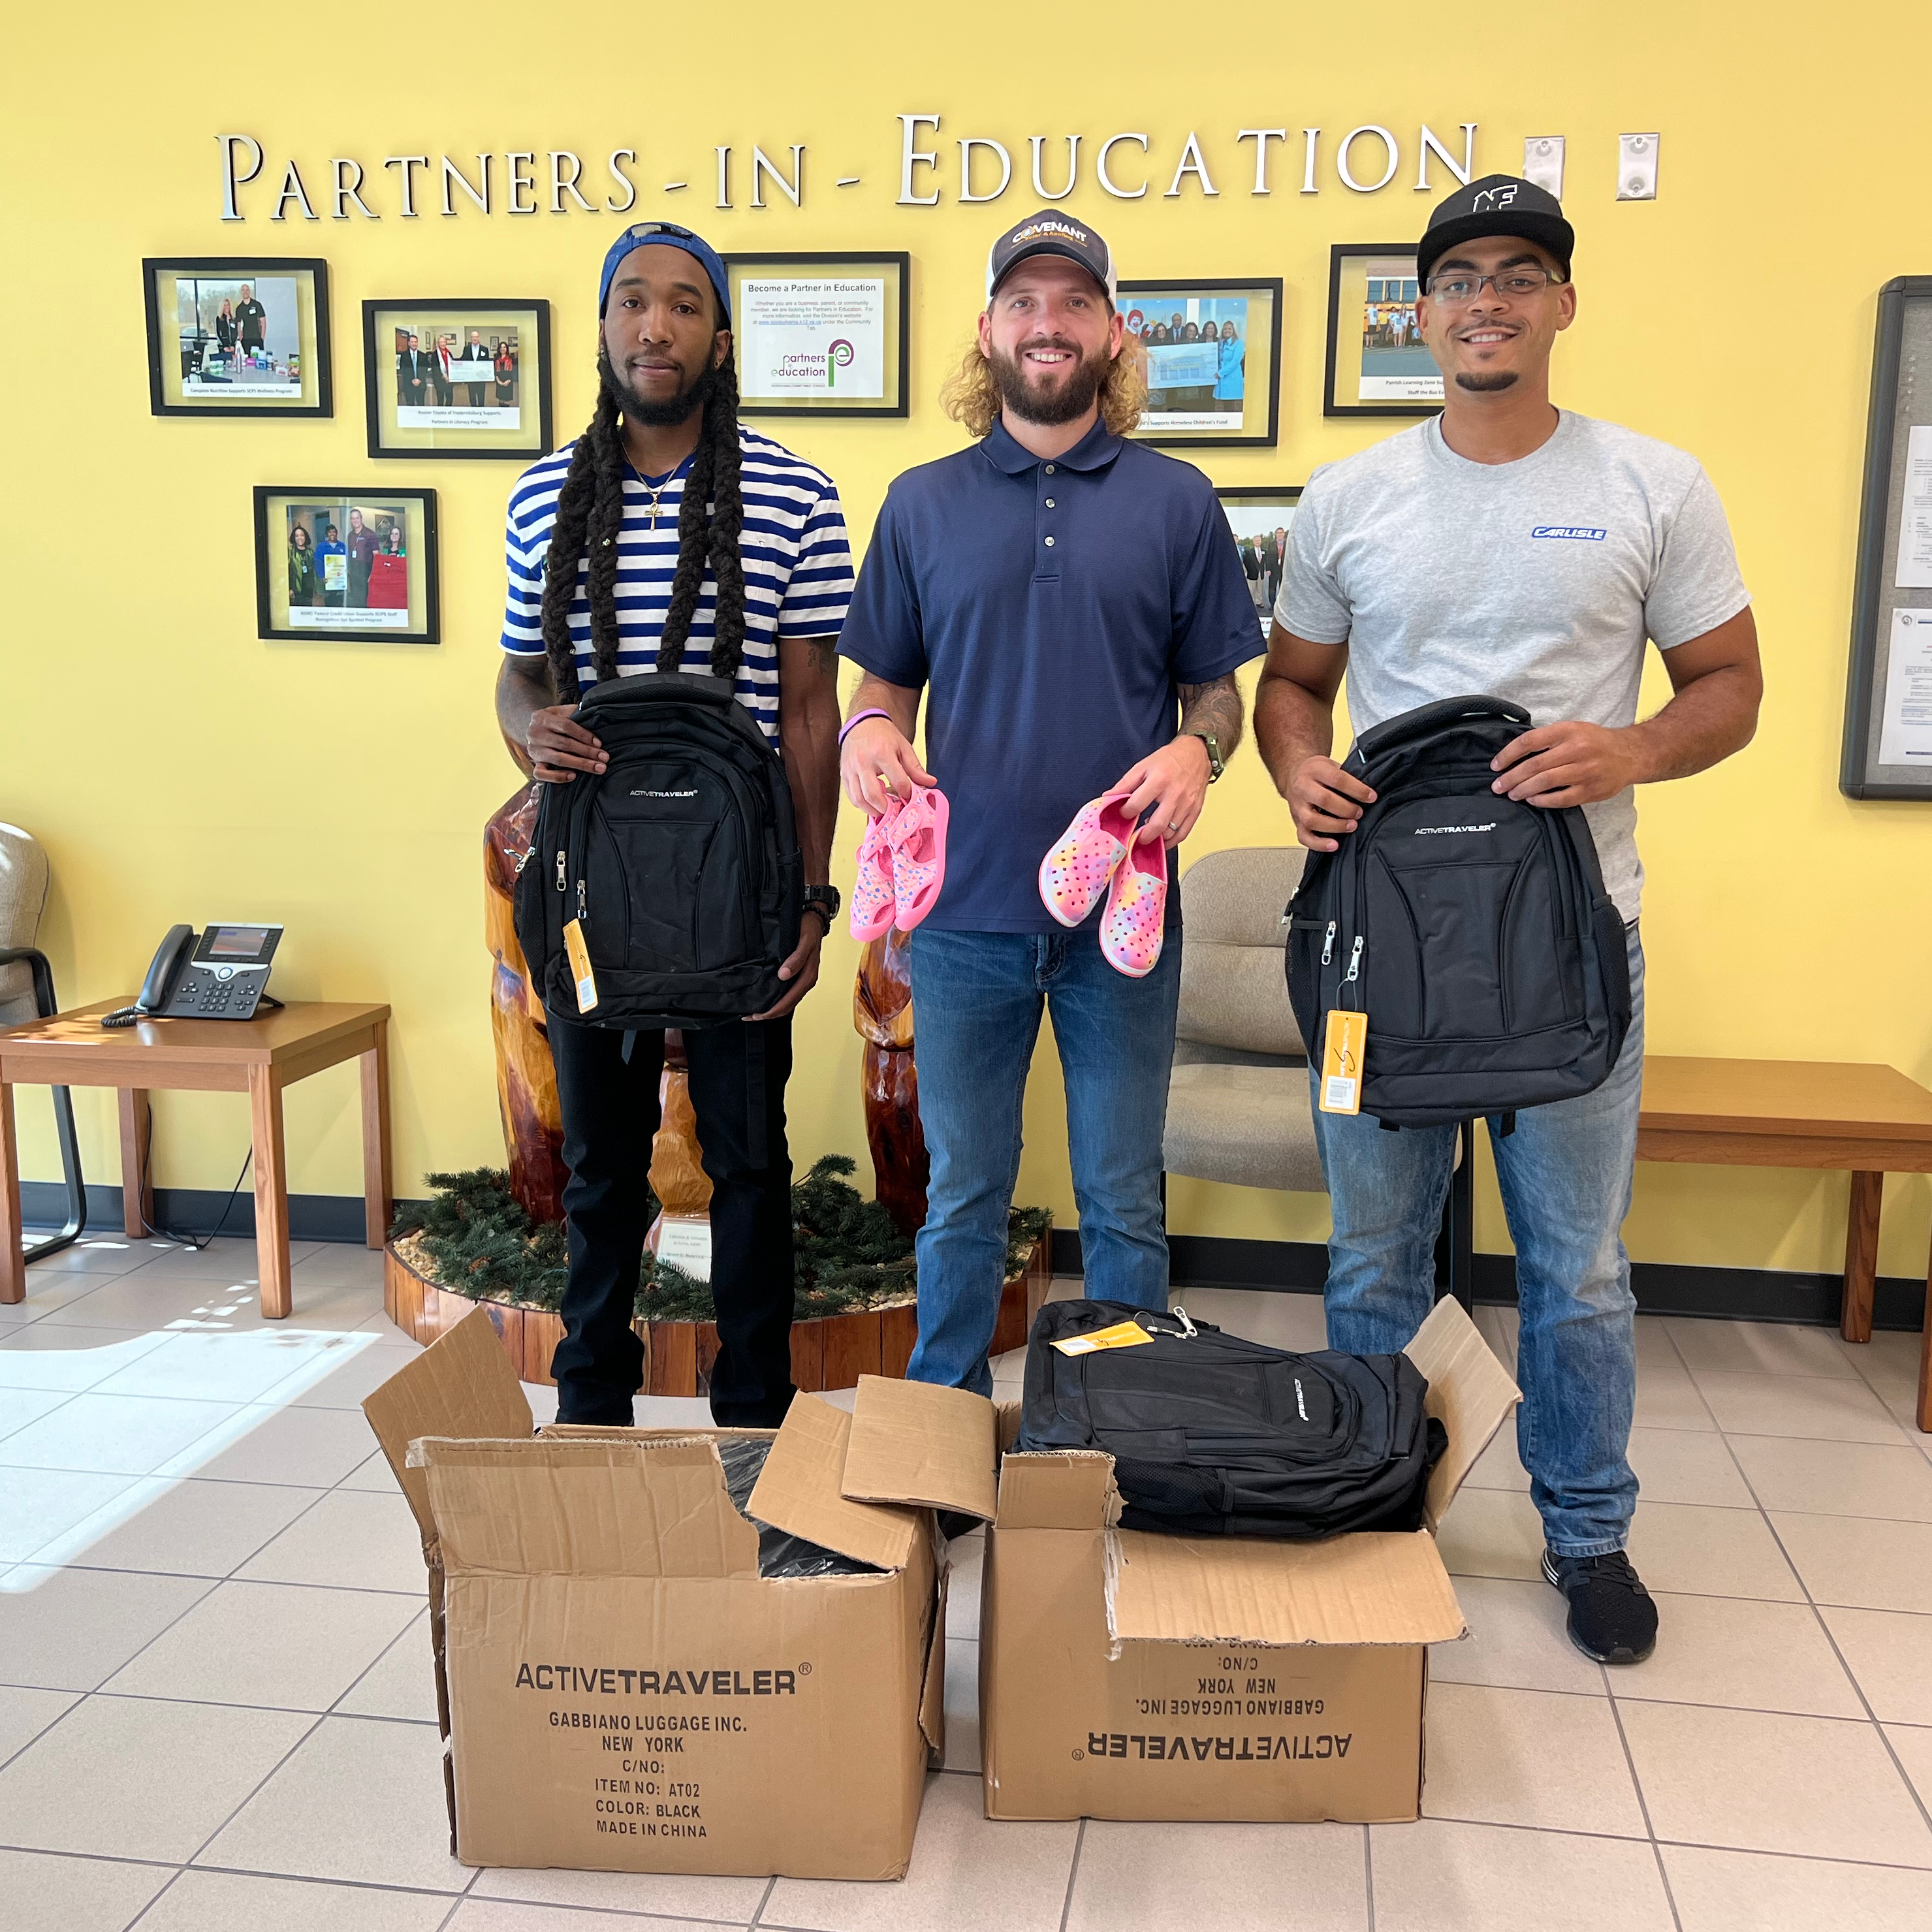 Three men from Kicks for Kids pose with the shoes and backpacks they donated in front of a yellow wall reading "Partners in Education".